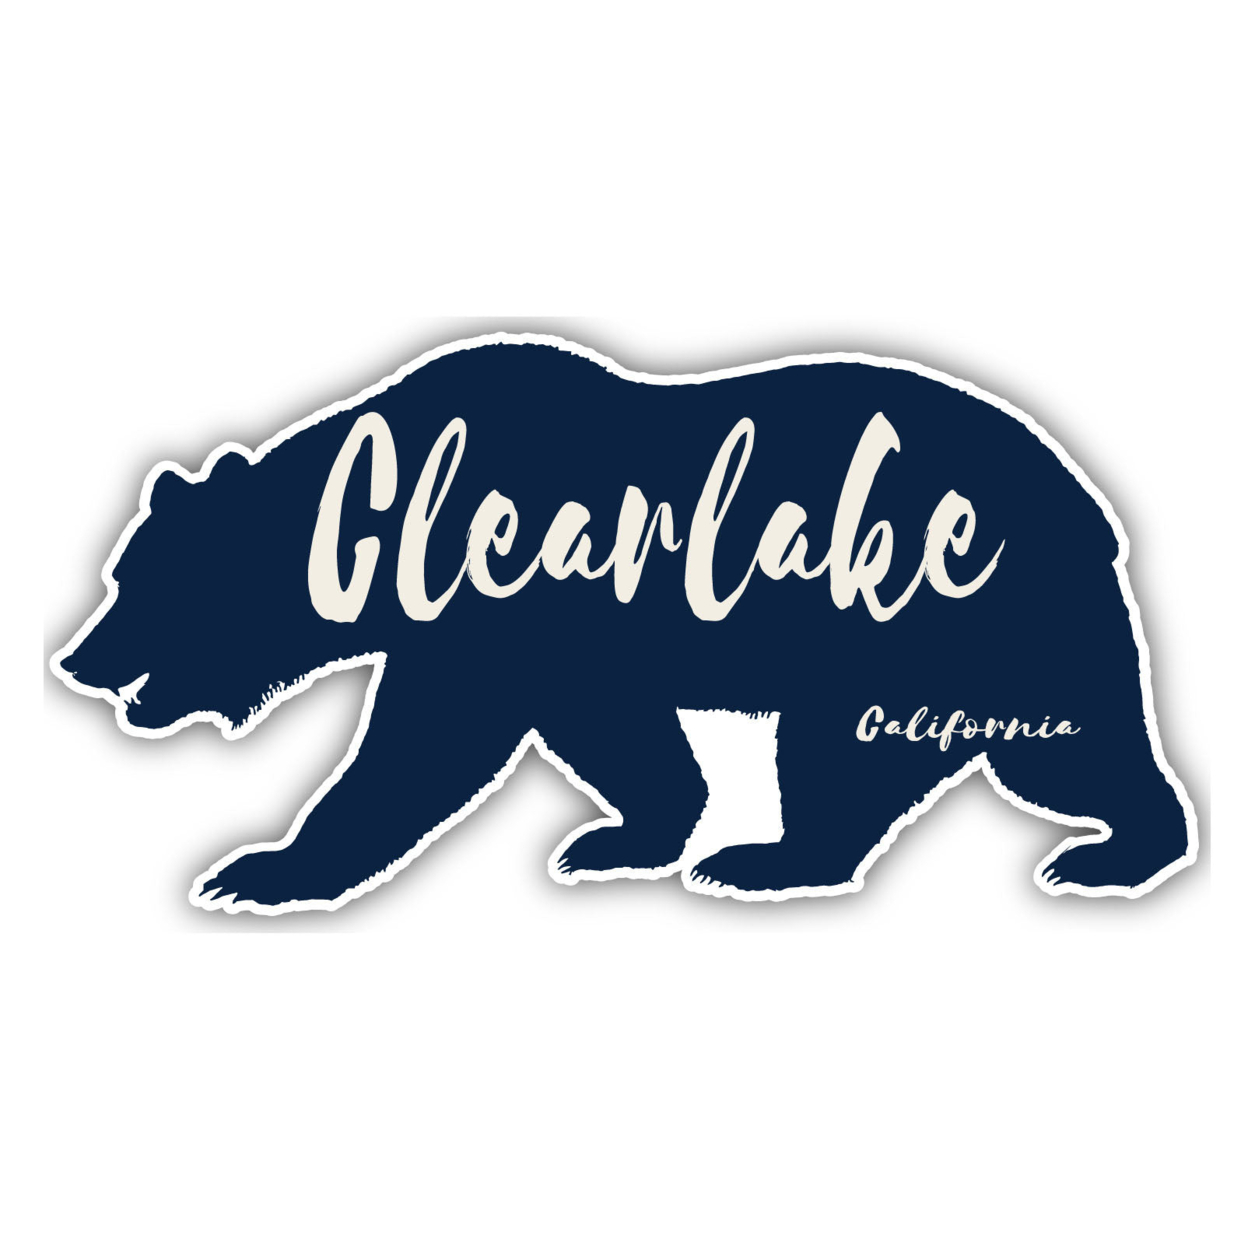 Clearlake California Souvenir Decorative Stickers (Choose Theme And Size) - 4-Pack, 12-Inch, Bear